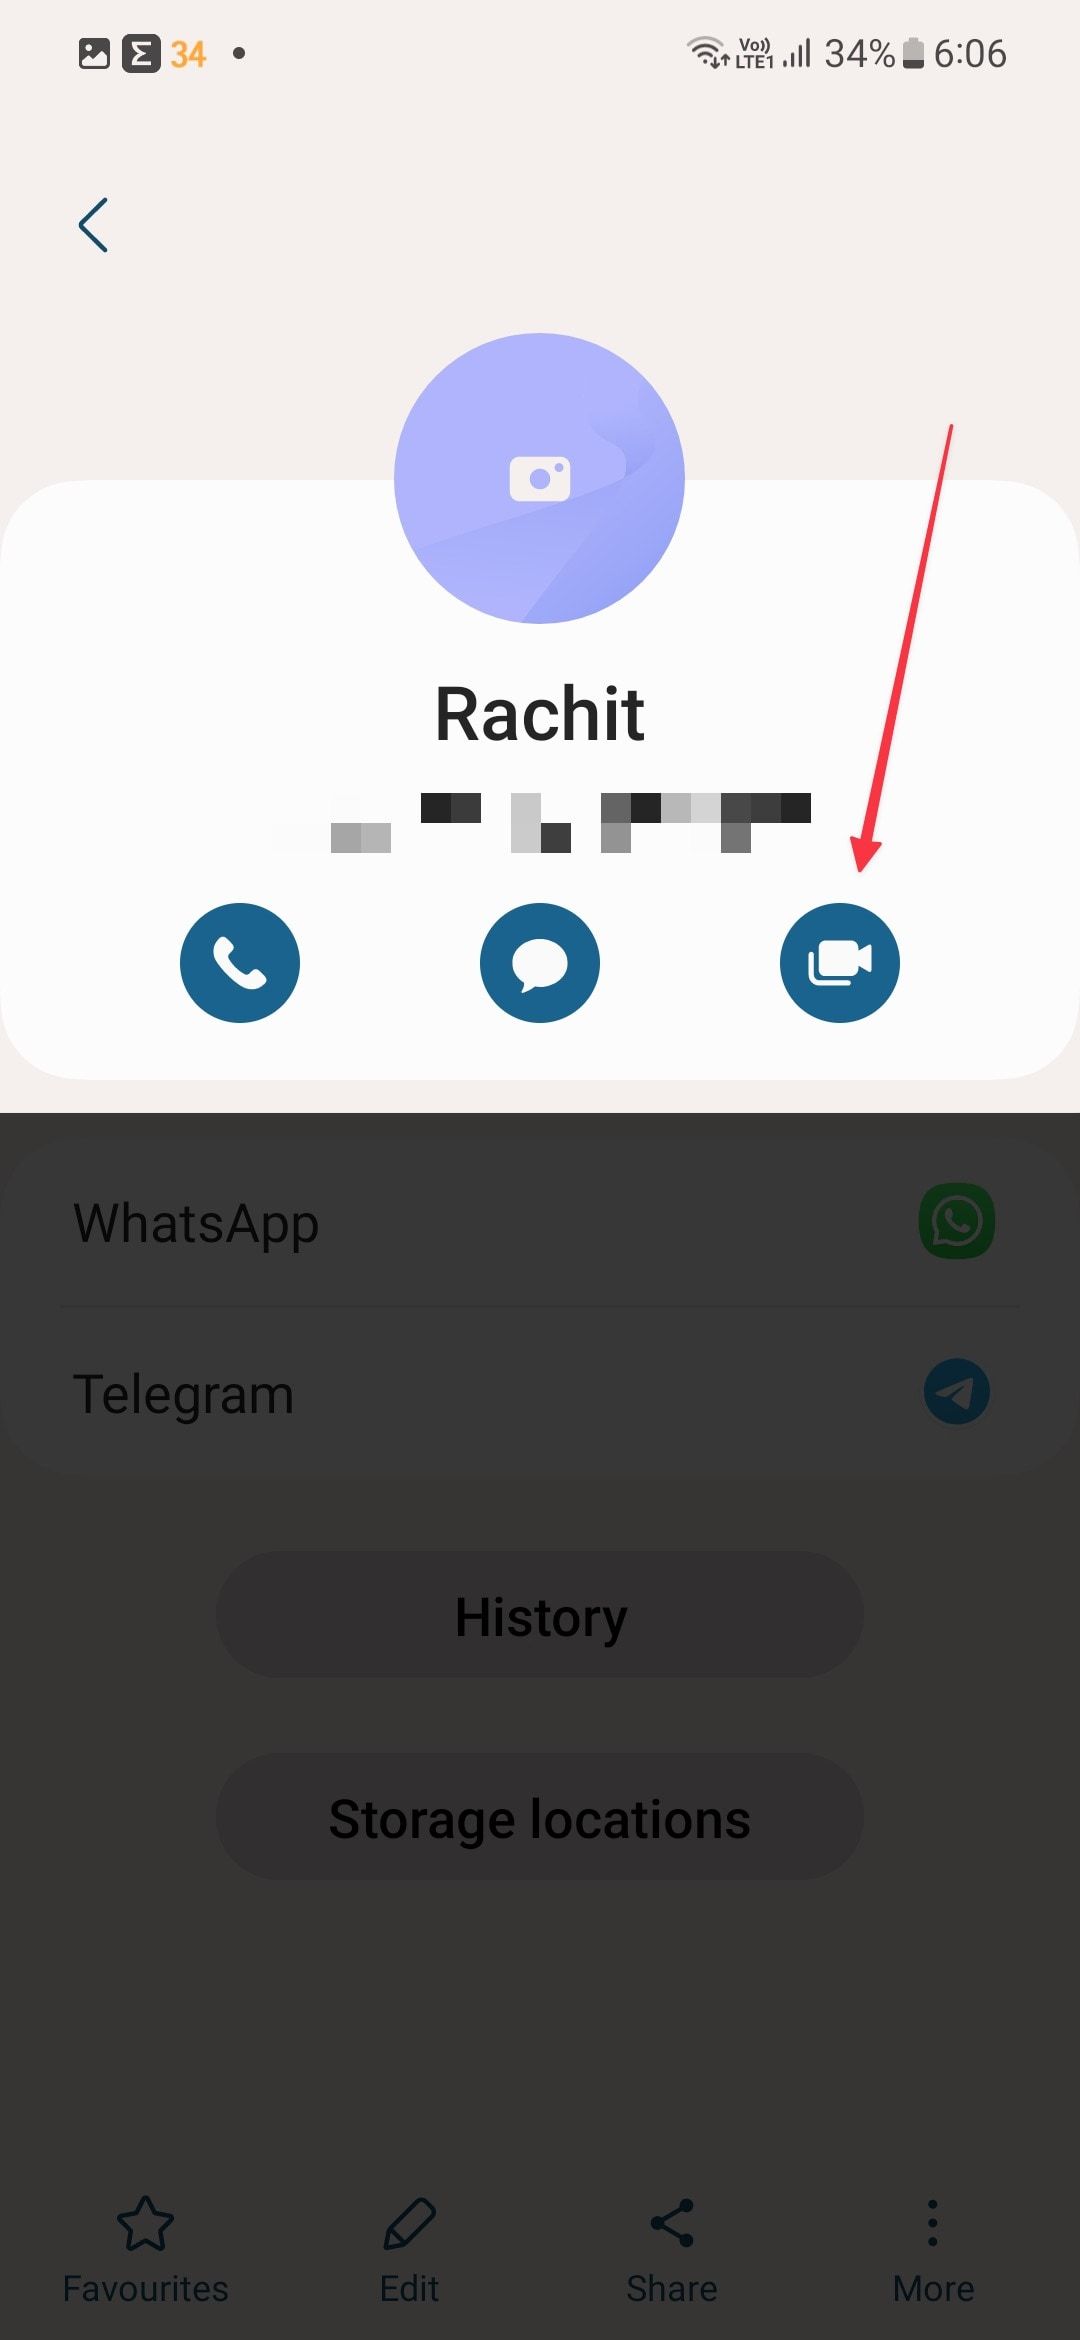 Samsung Contact info page screenshot showing video call button